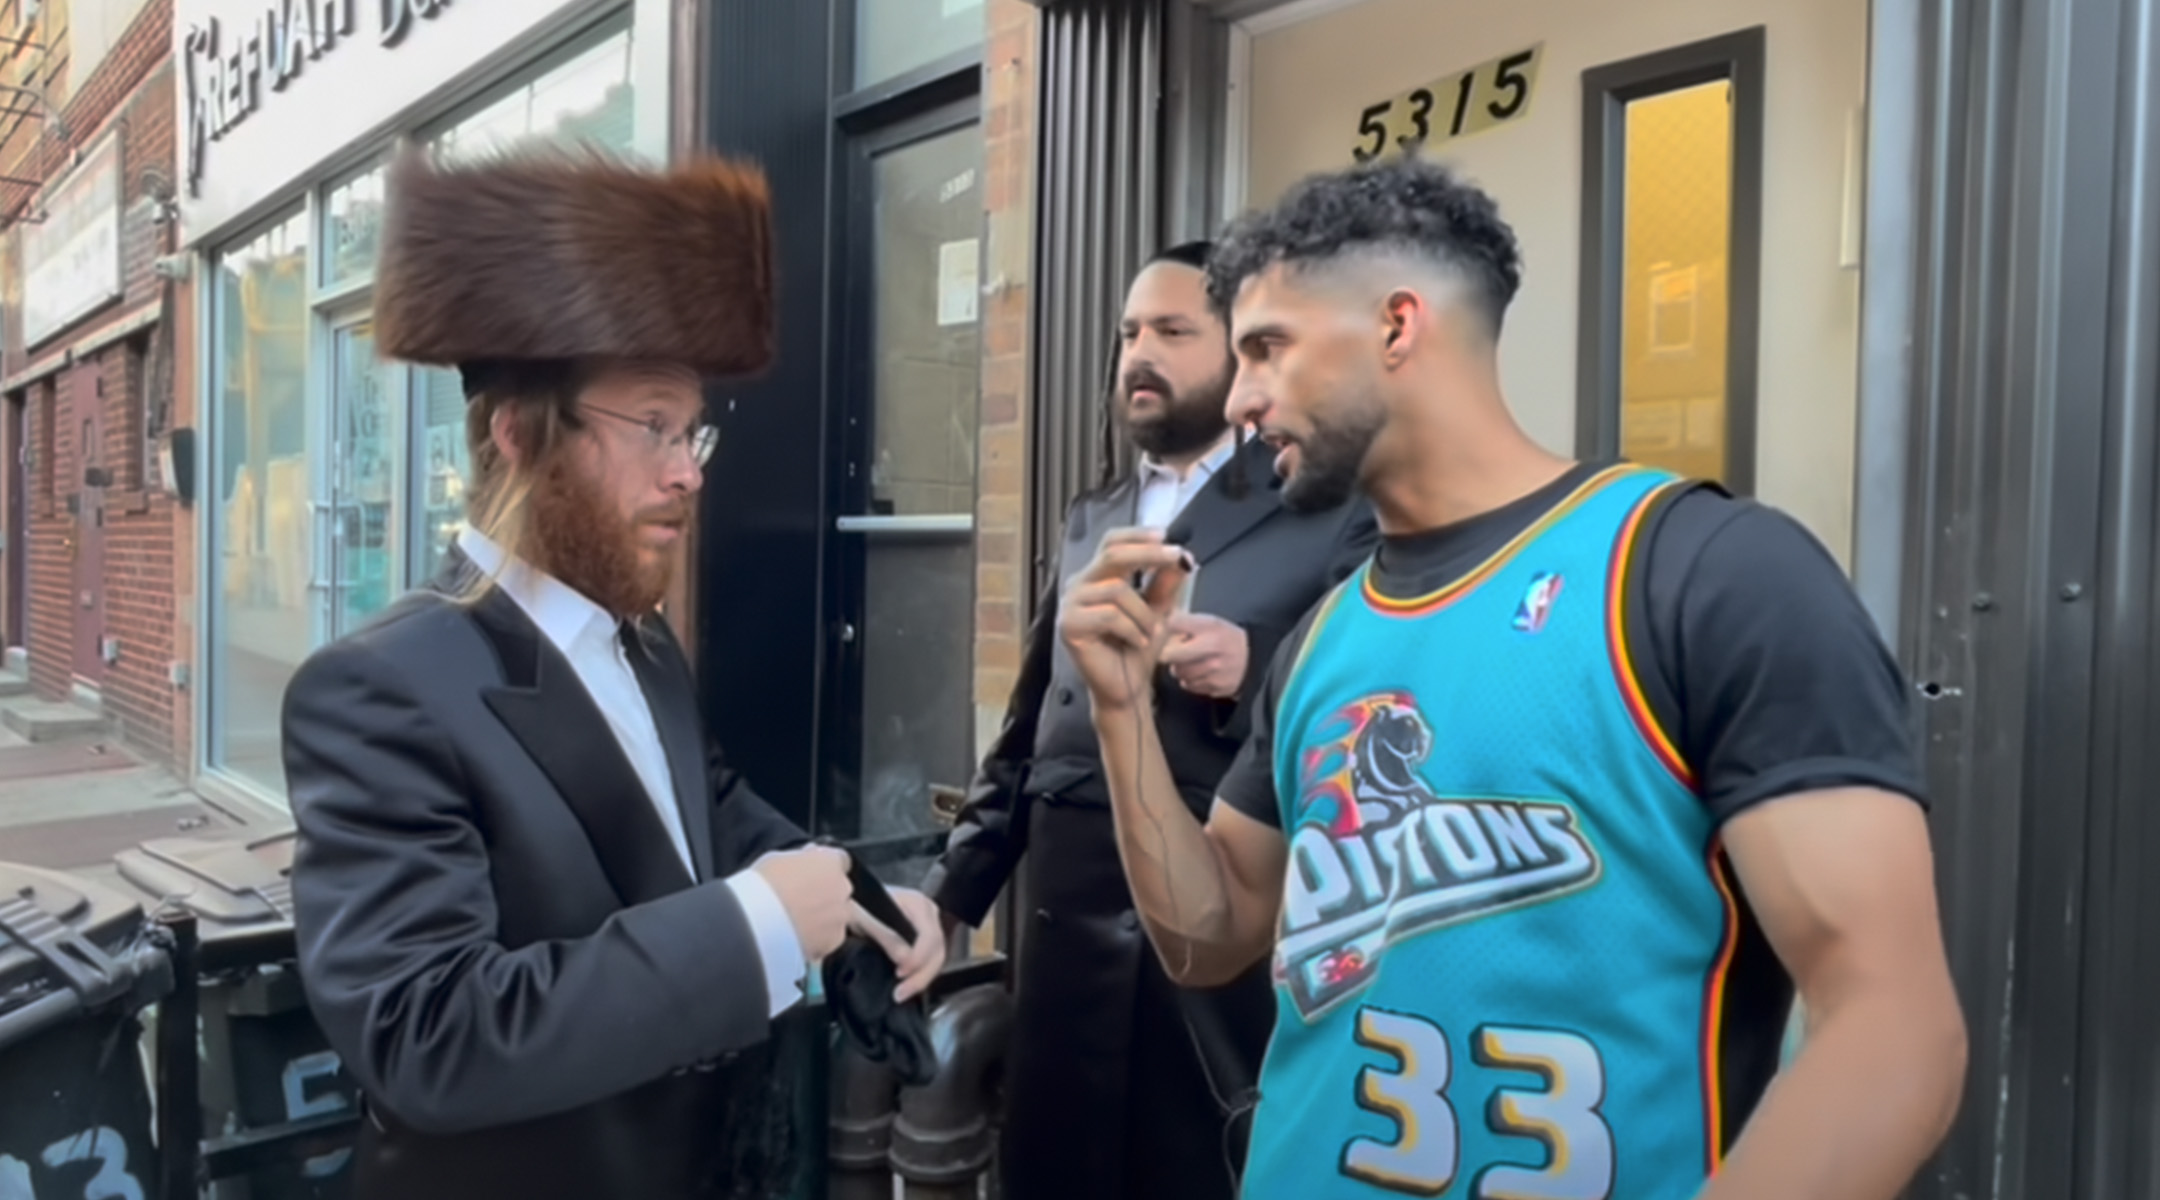 Abdulla Almasmari, otherwise known as YouTuber Dulla Mulla, put out a video where he interviewed Orthodox men in Brooklyn and asked their thoughts about the Israeli Palestinian conflict.